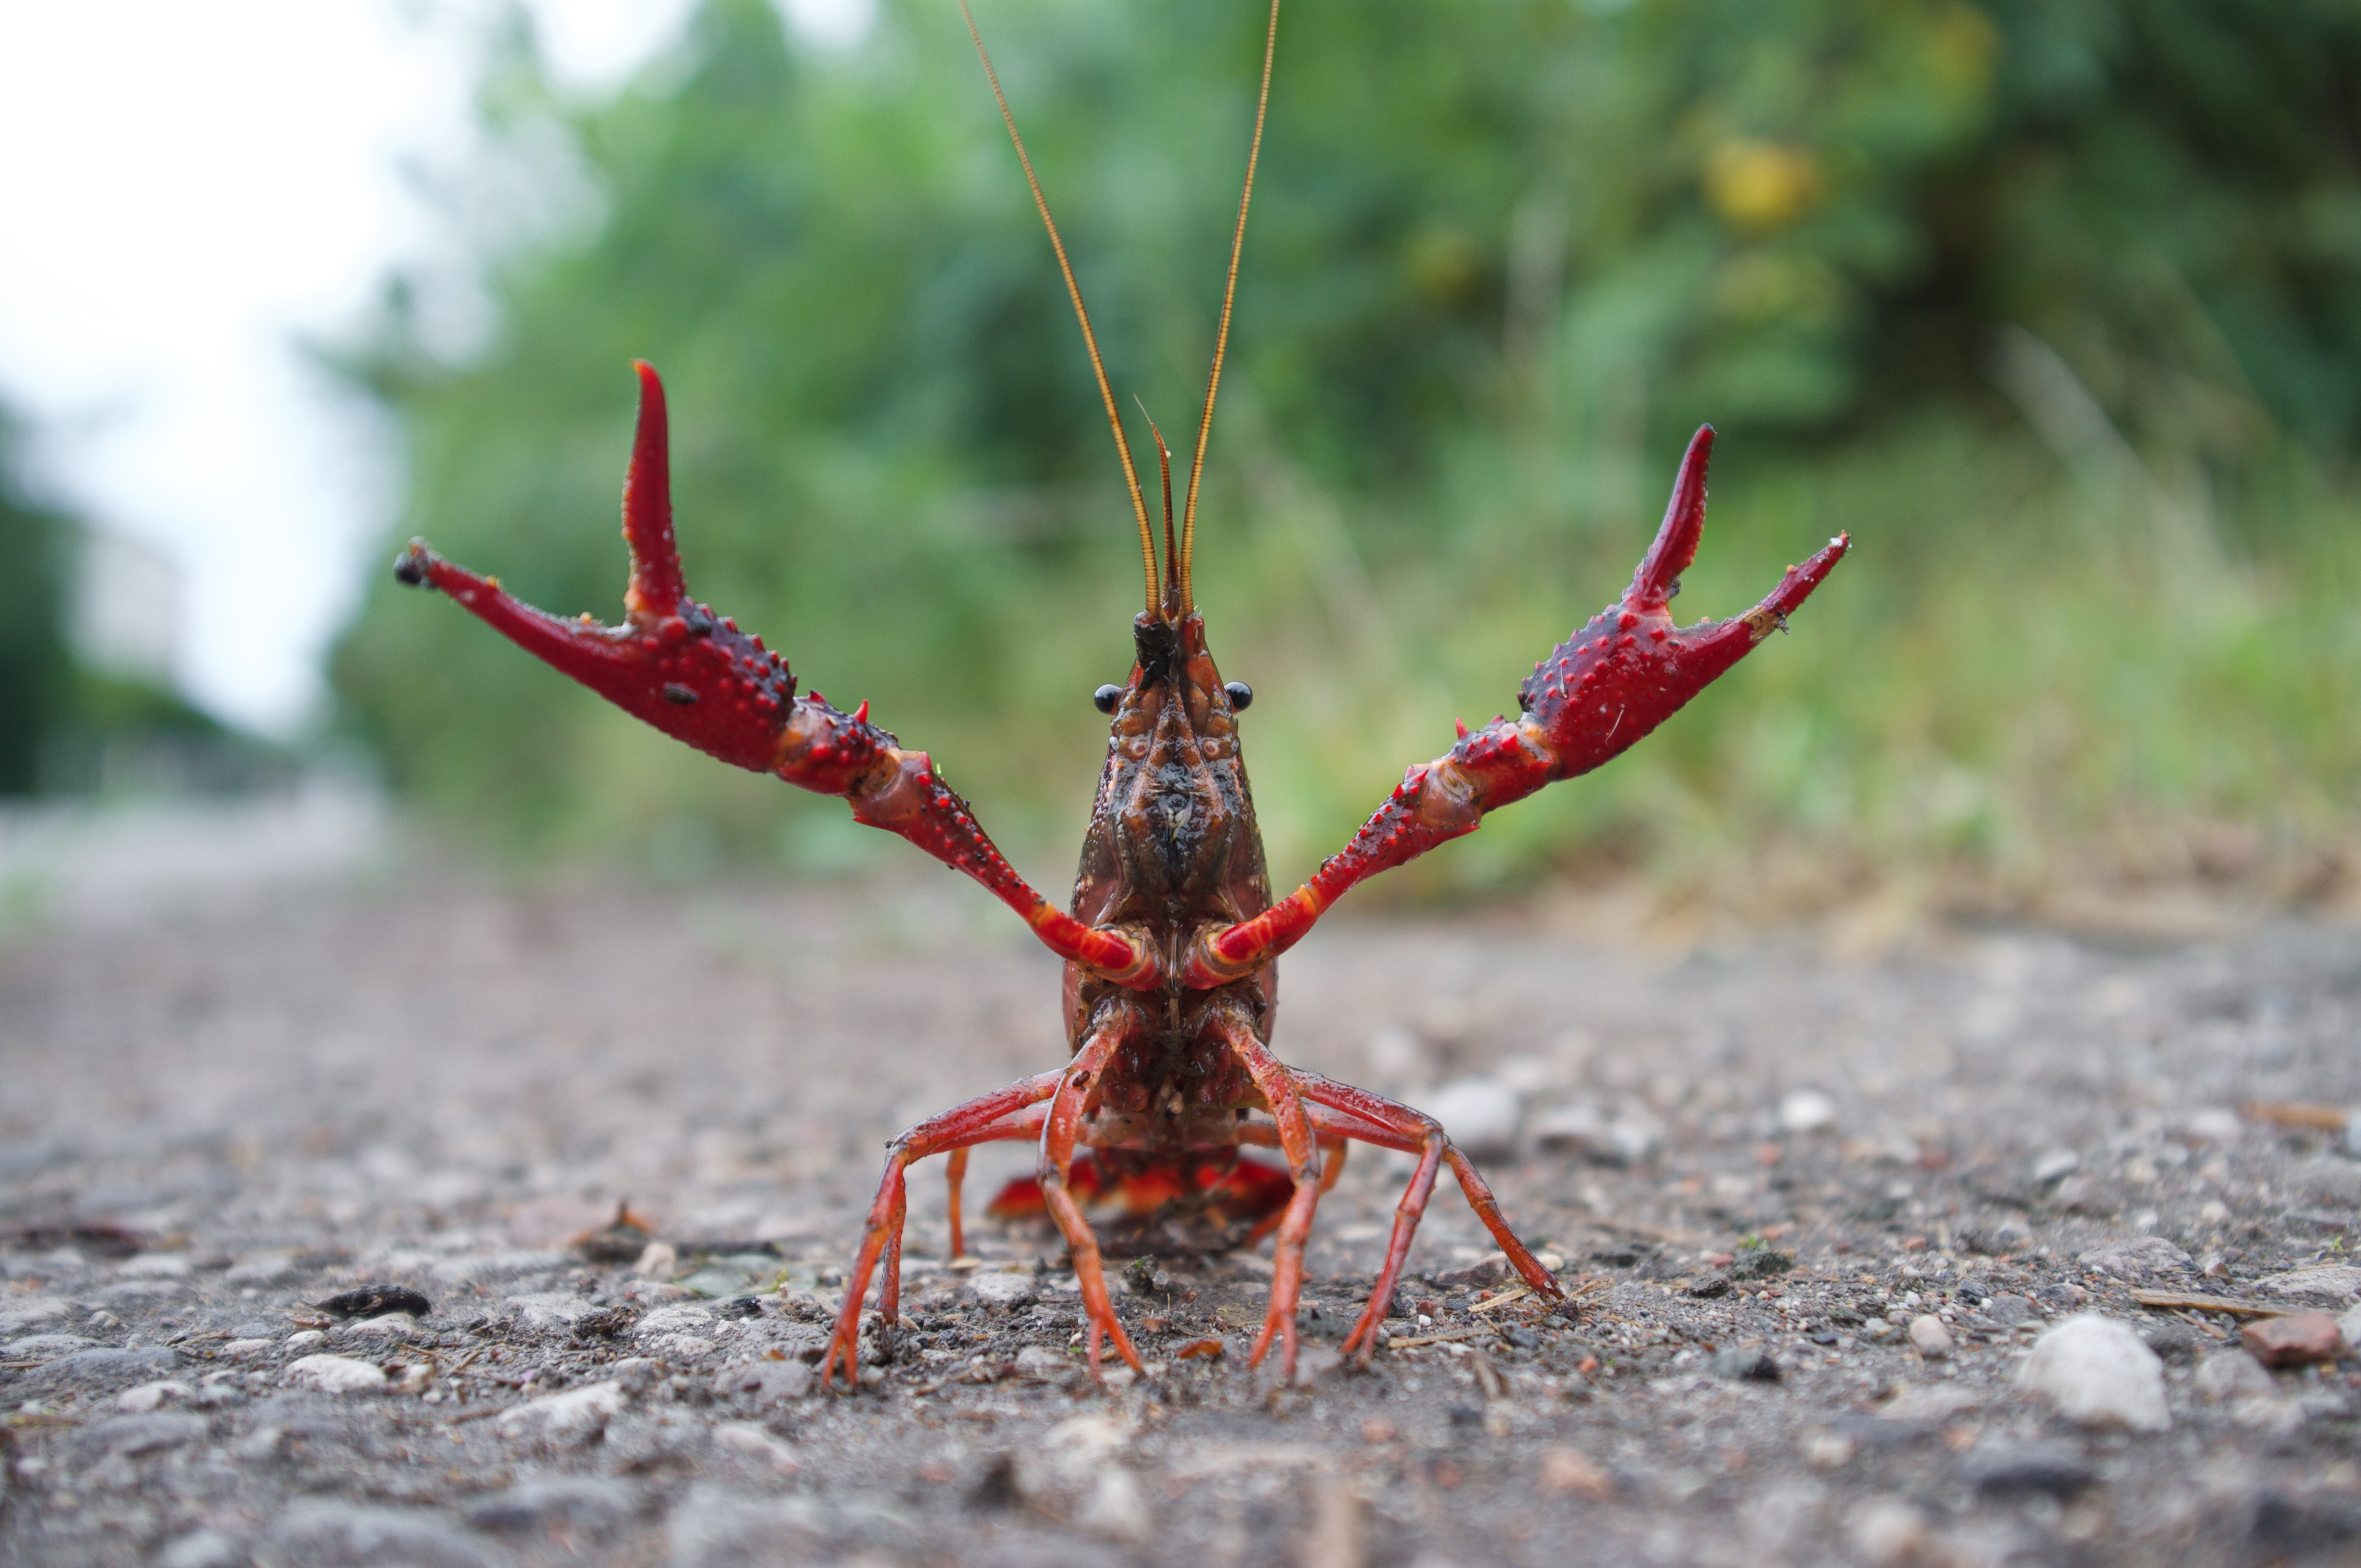 A bright red crayfish sits atop grey gravel with its red and bumpy claws outstretched.